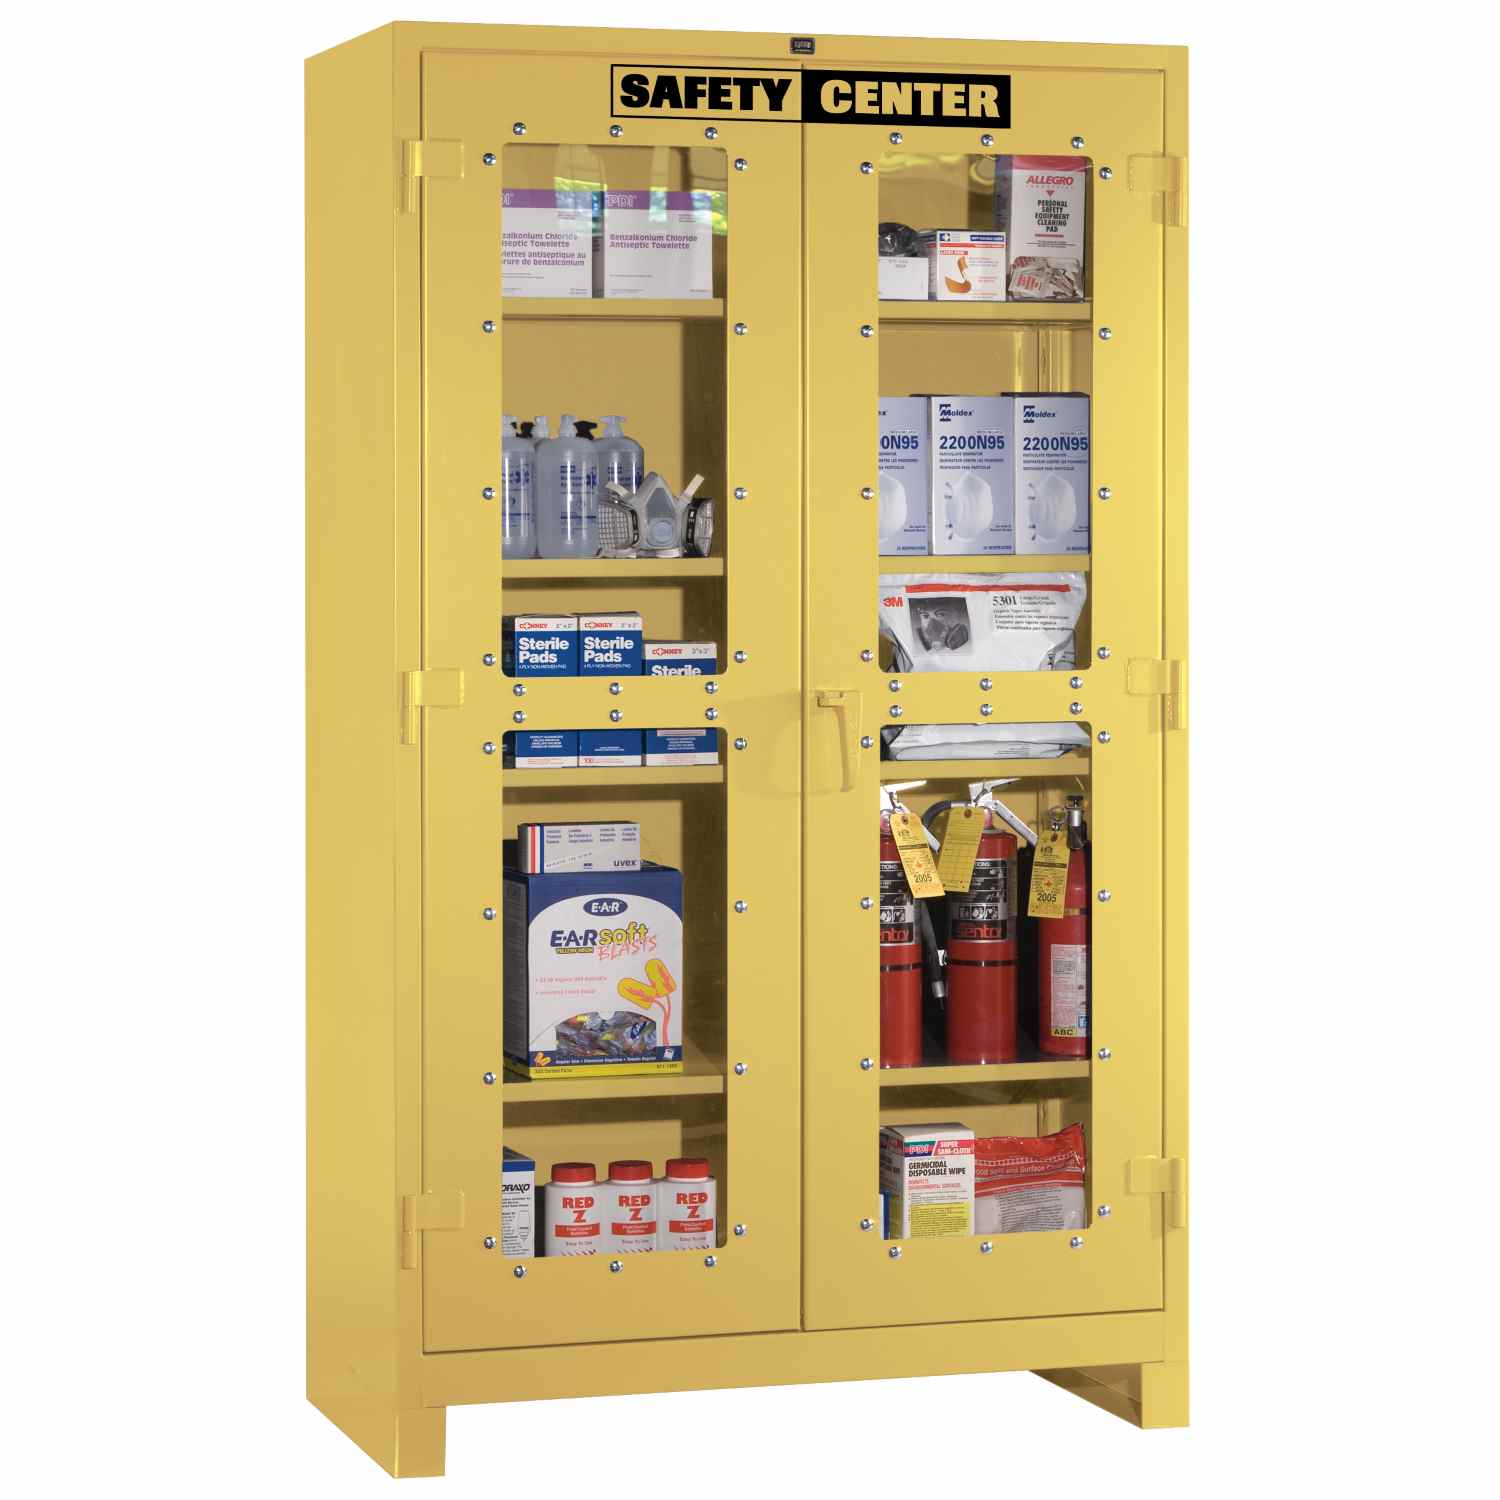 https://www.lyonworkspace.com/wp-content/uploads/lyon-all-welded-clearview-safety-center-cabinet-1120SC-yellow-with-props.jpg